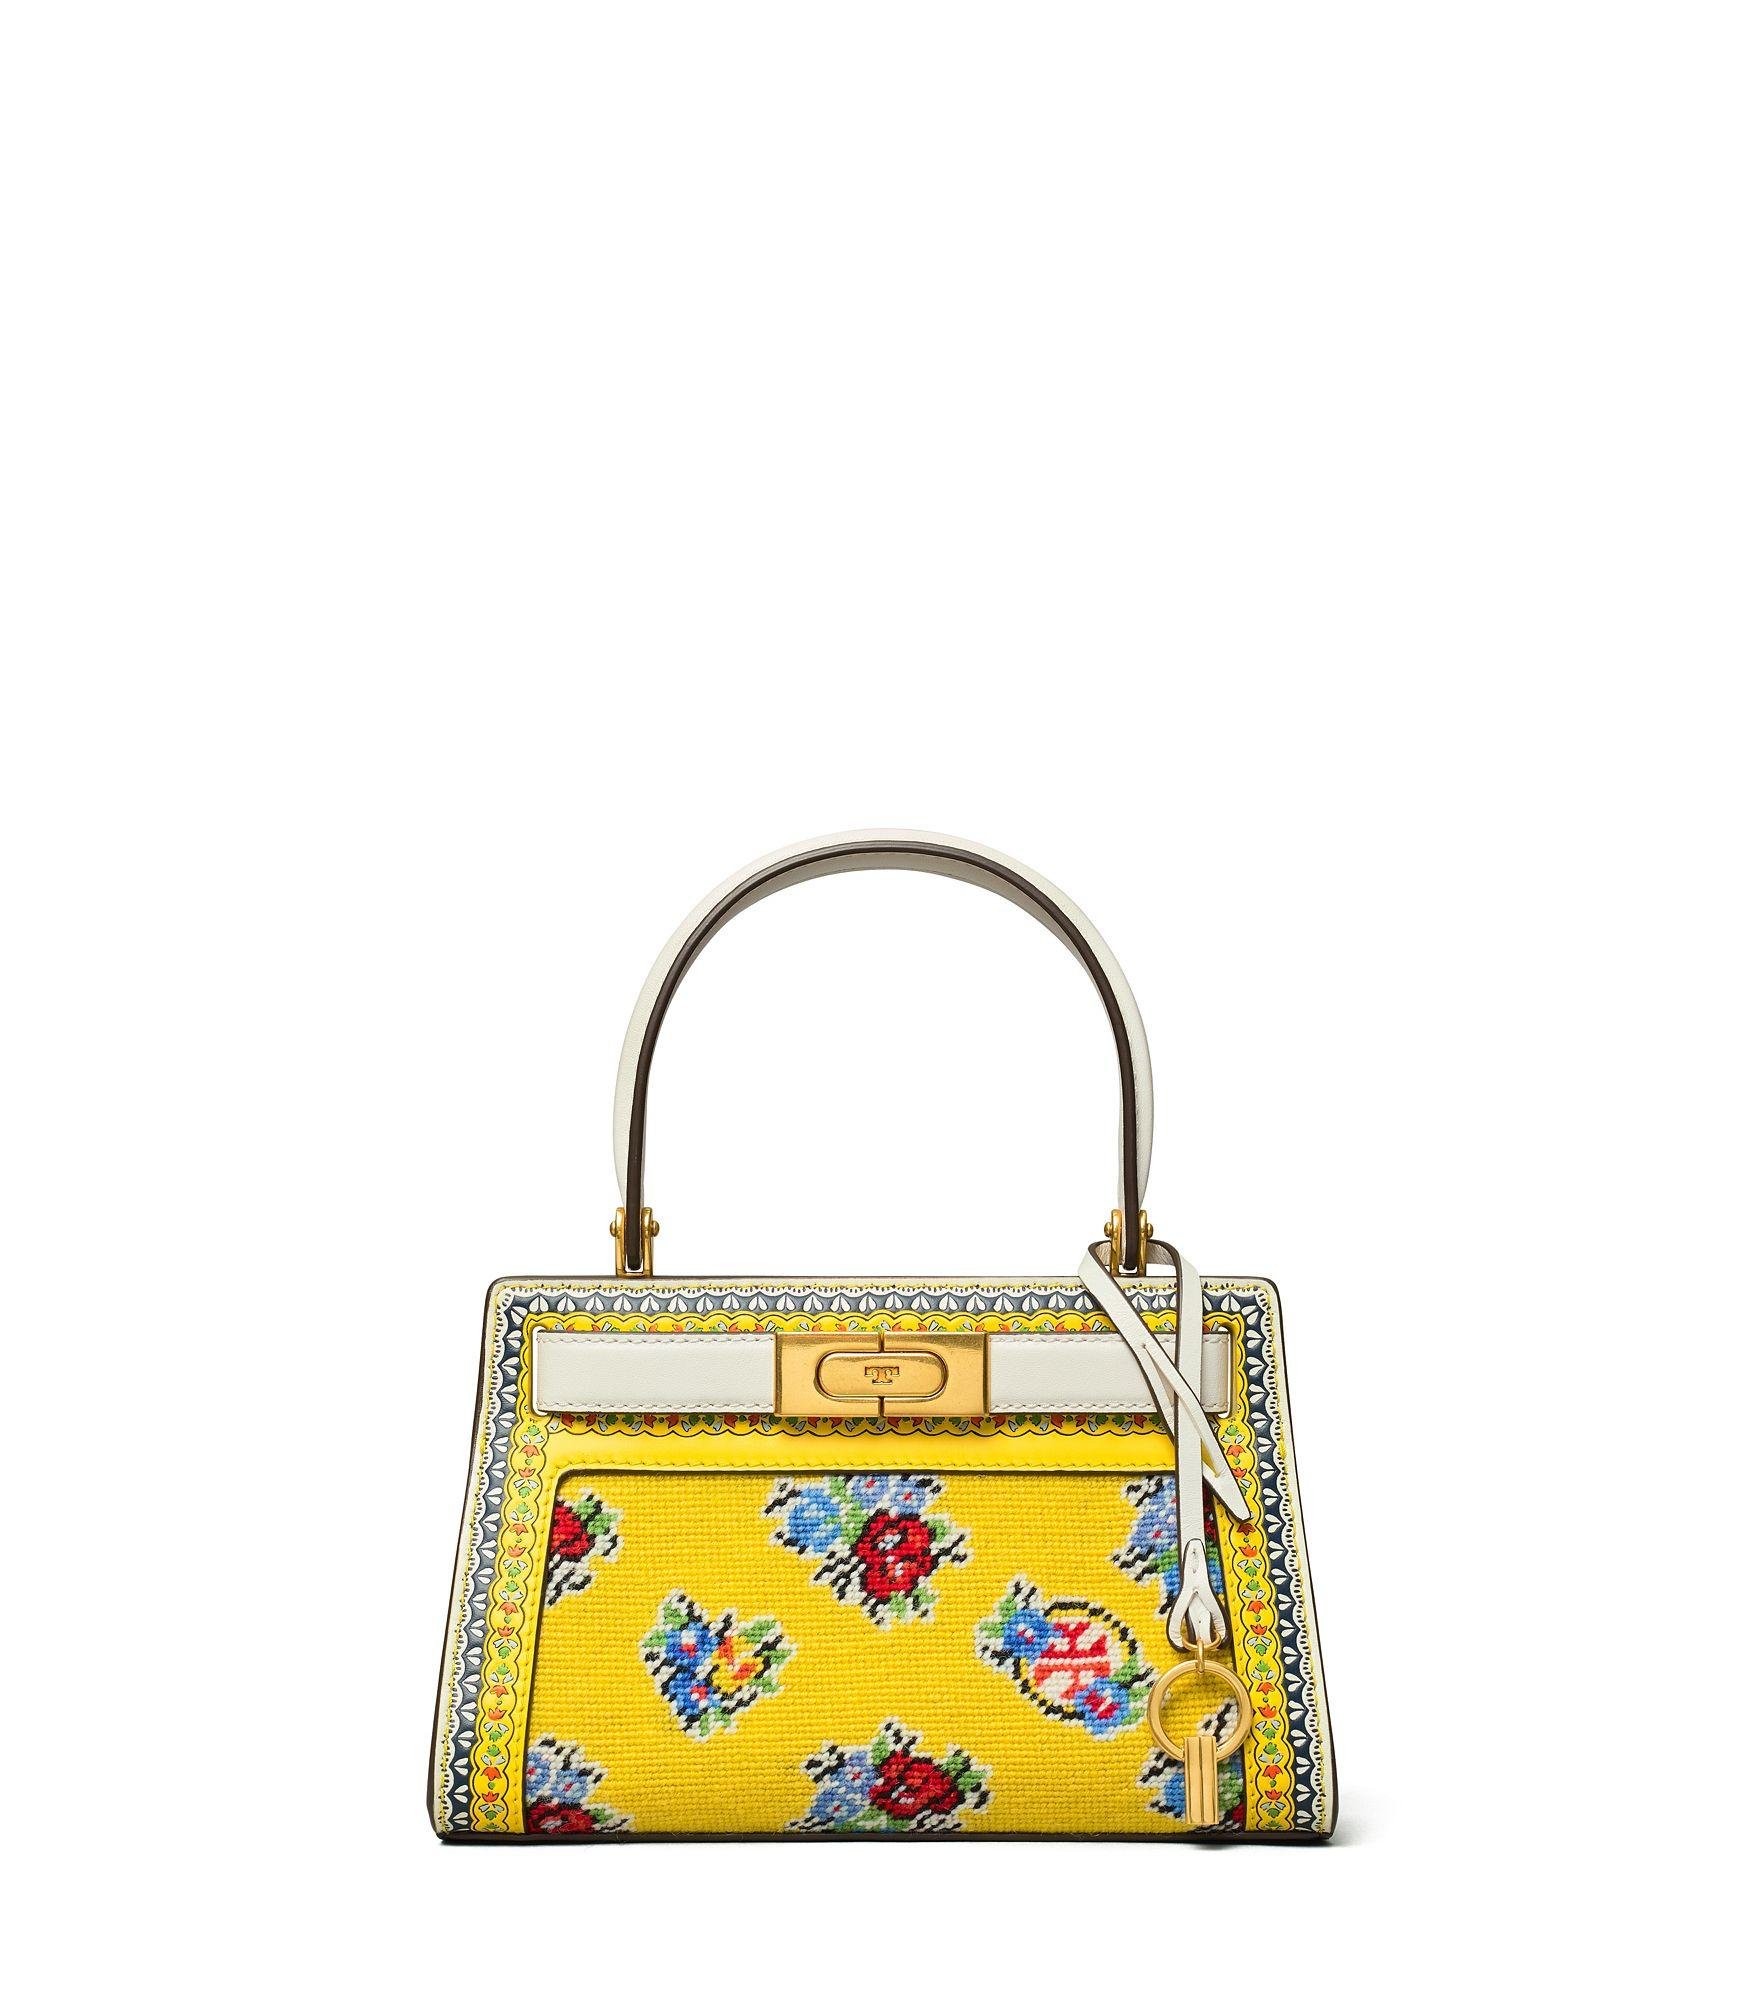 Tory Burch Leather Lee Radziwill Petite Bag in Yellow | Lyst